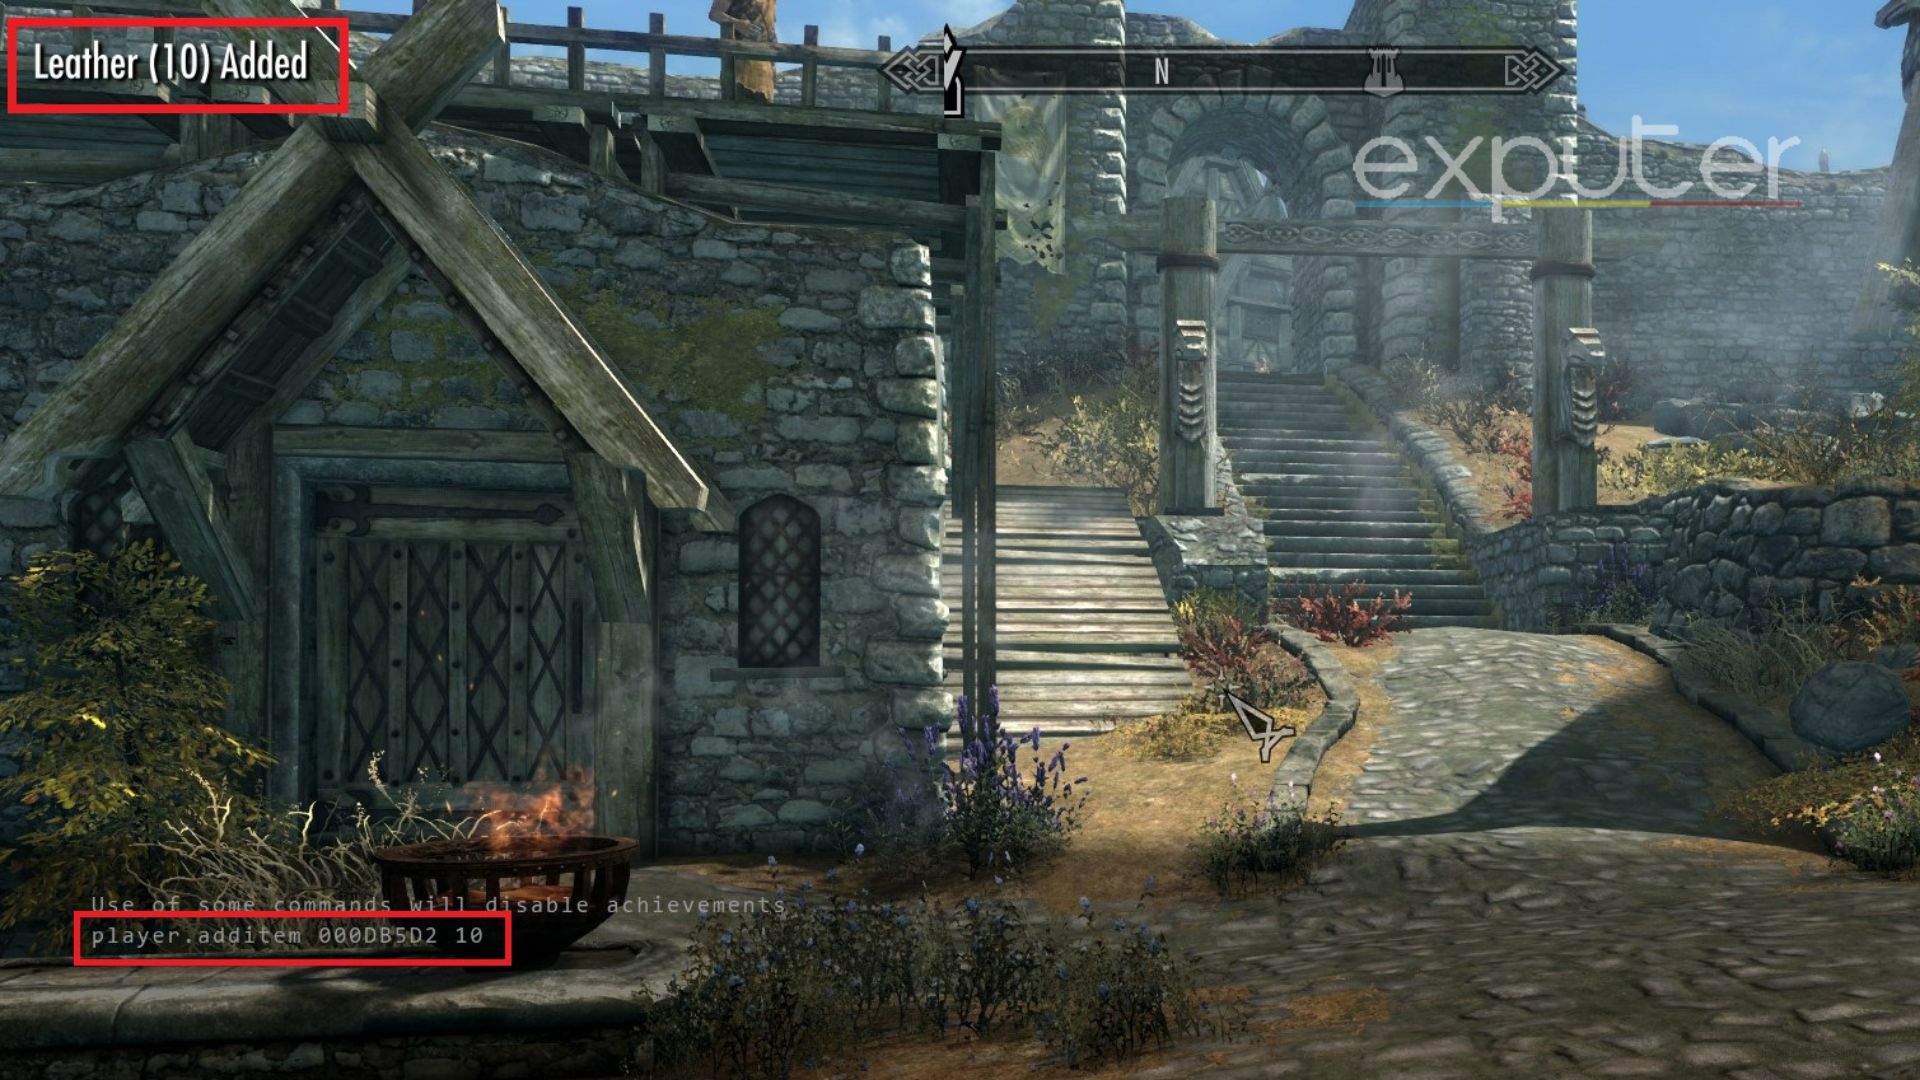 Leather ID in Skyrim.